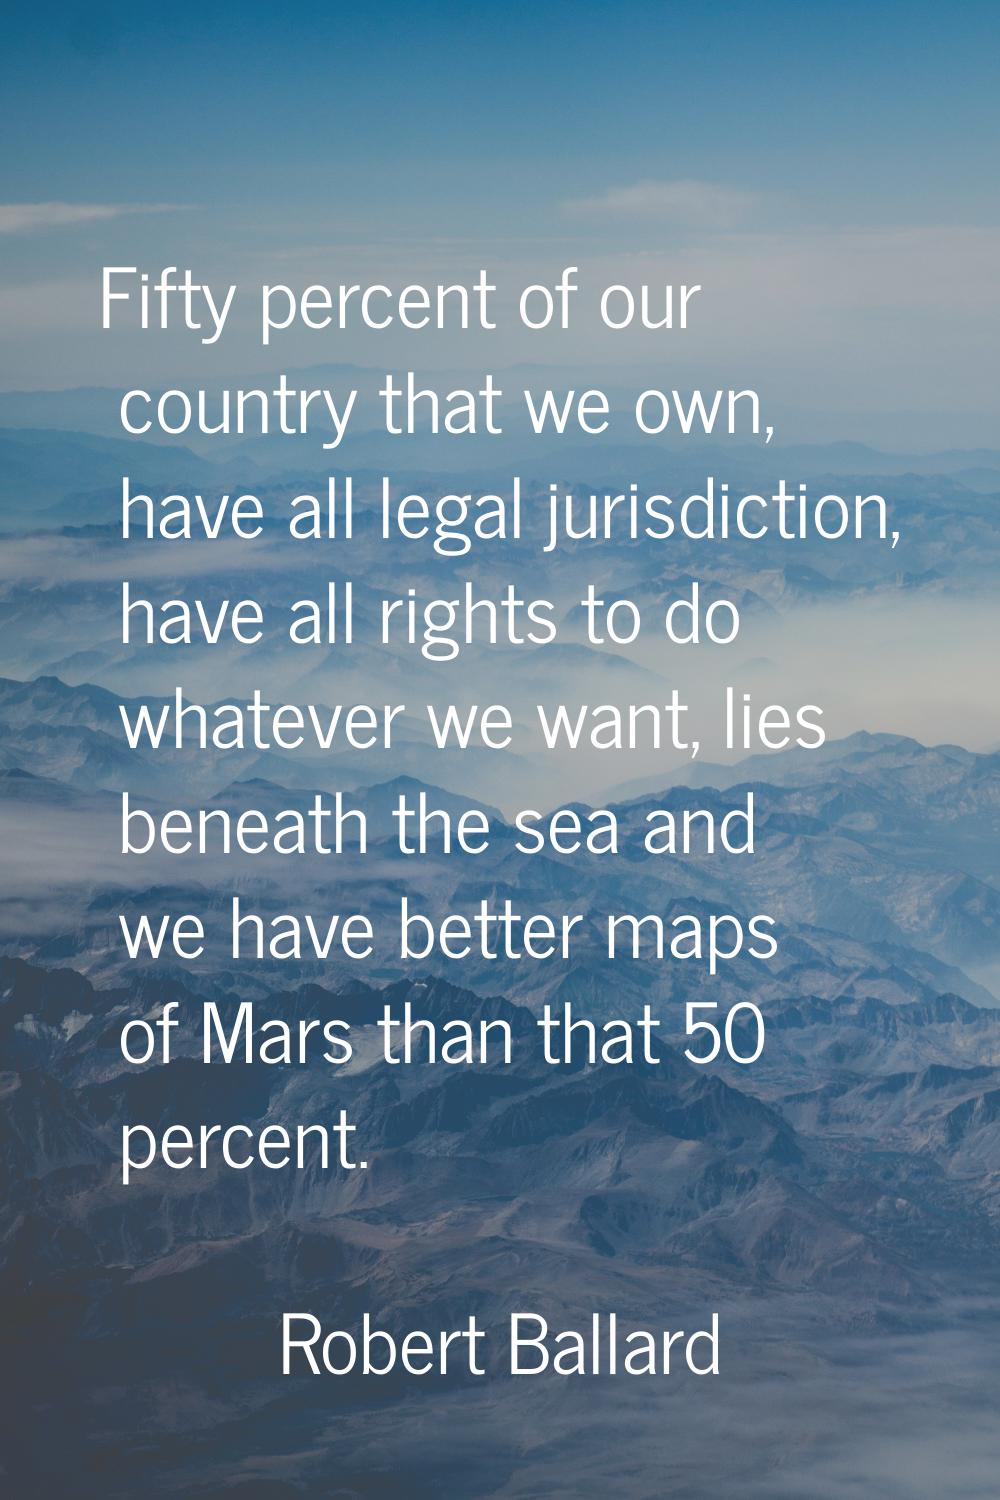 Fifty percent of our country that we own, have all legal jurisdiction, have all rights to do whatev